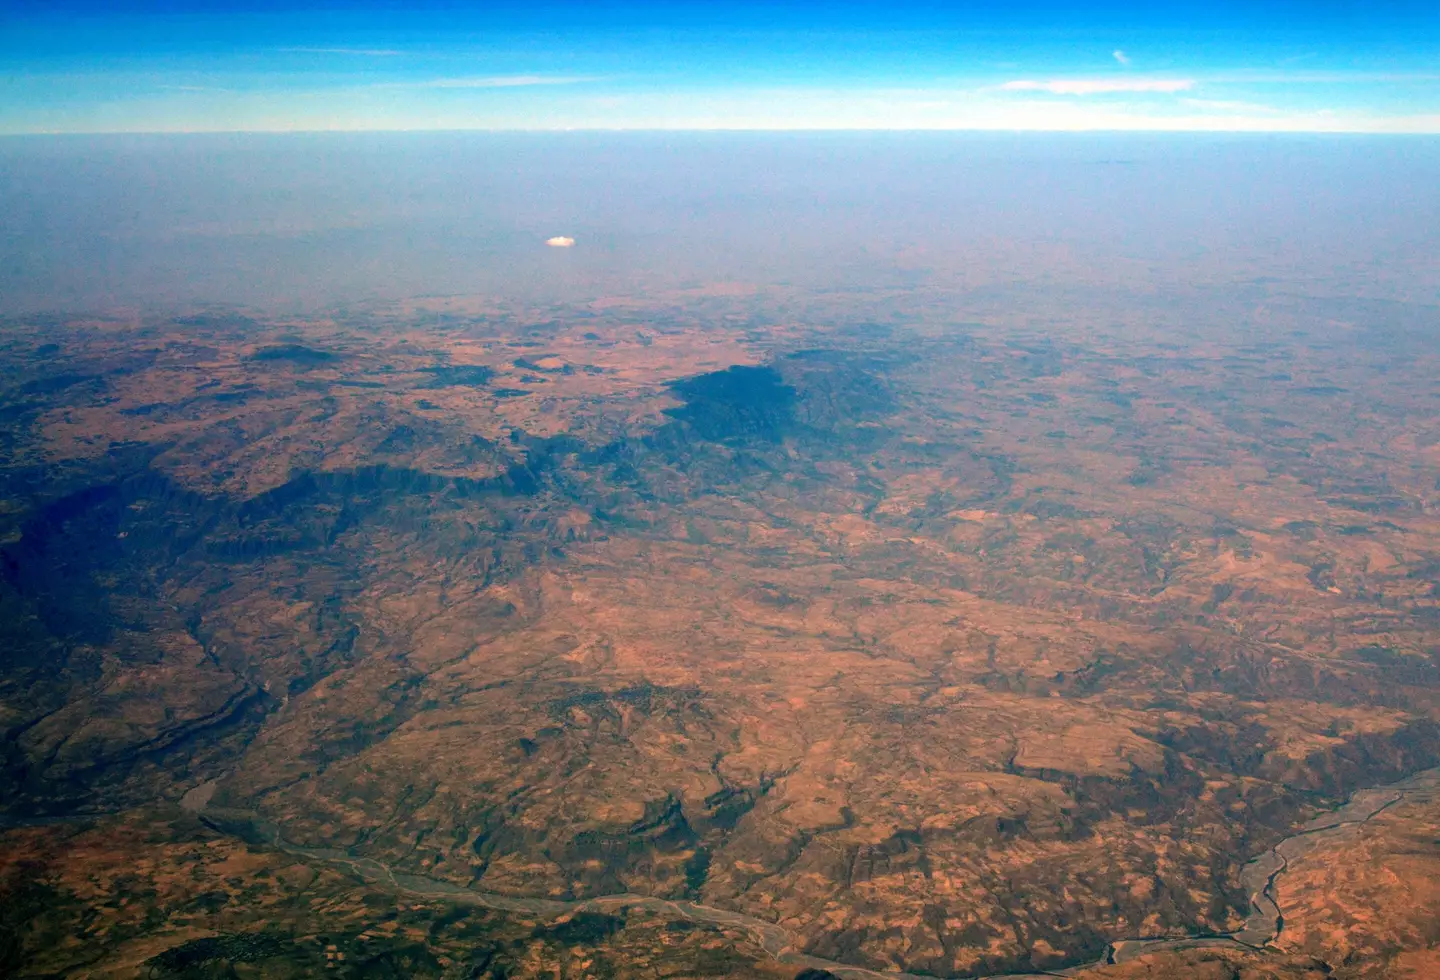 Aerial view of Africa's Great Rift Valley.